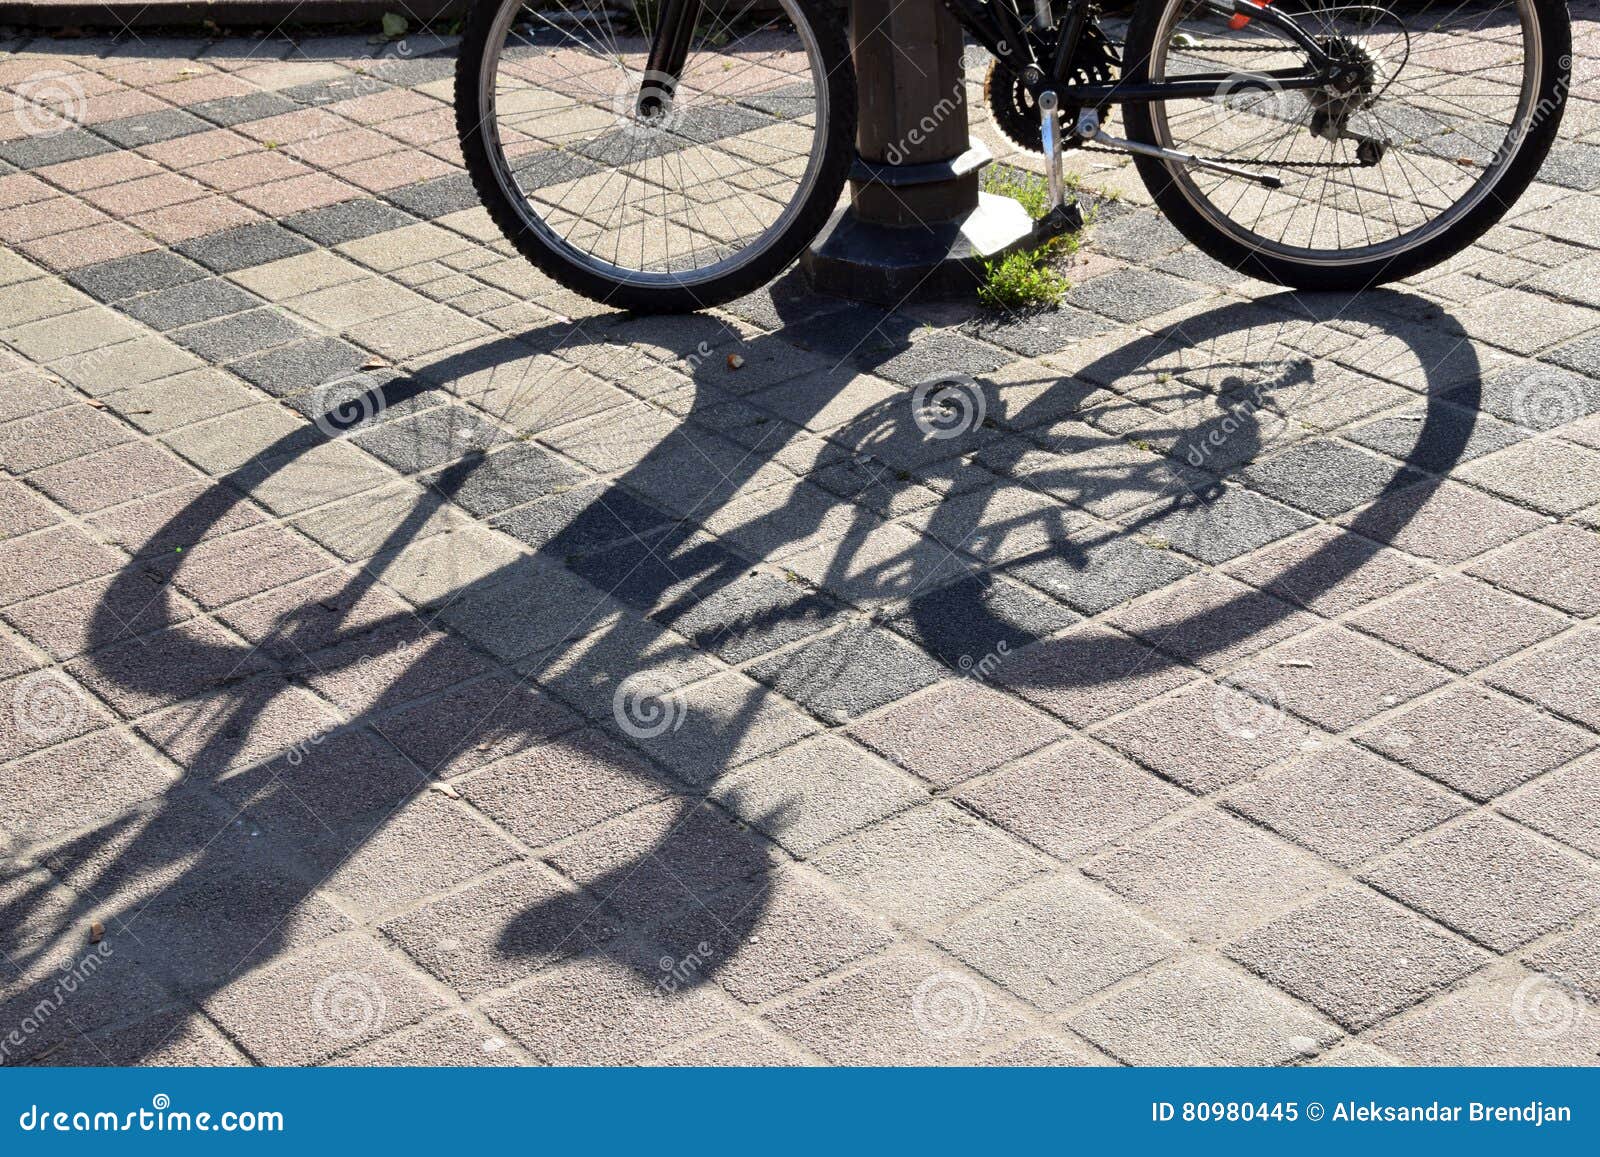 the lines and shadows on concrete of bicicle